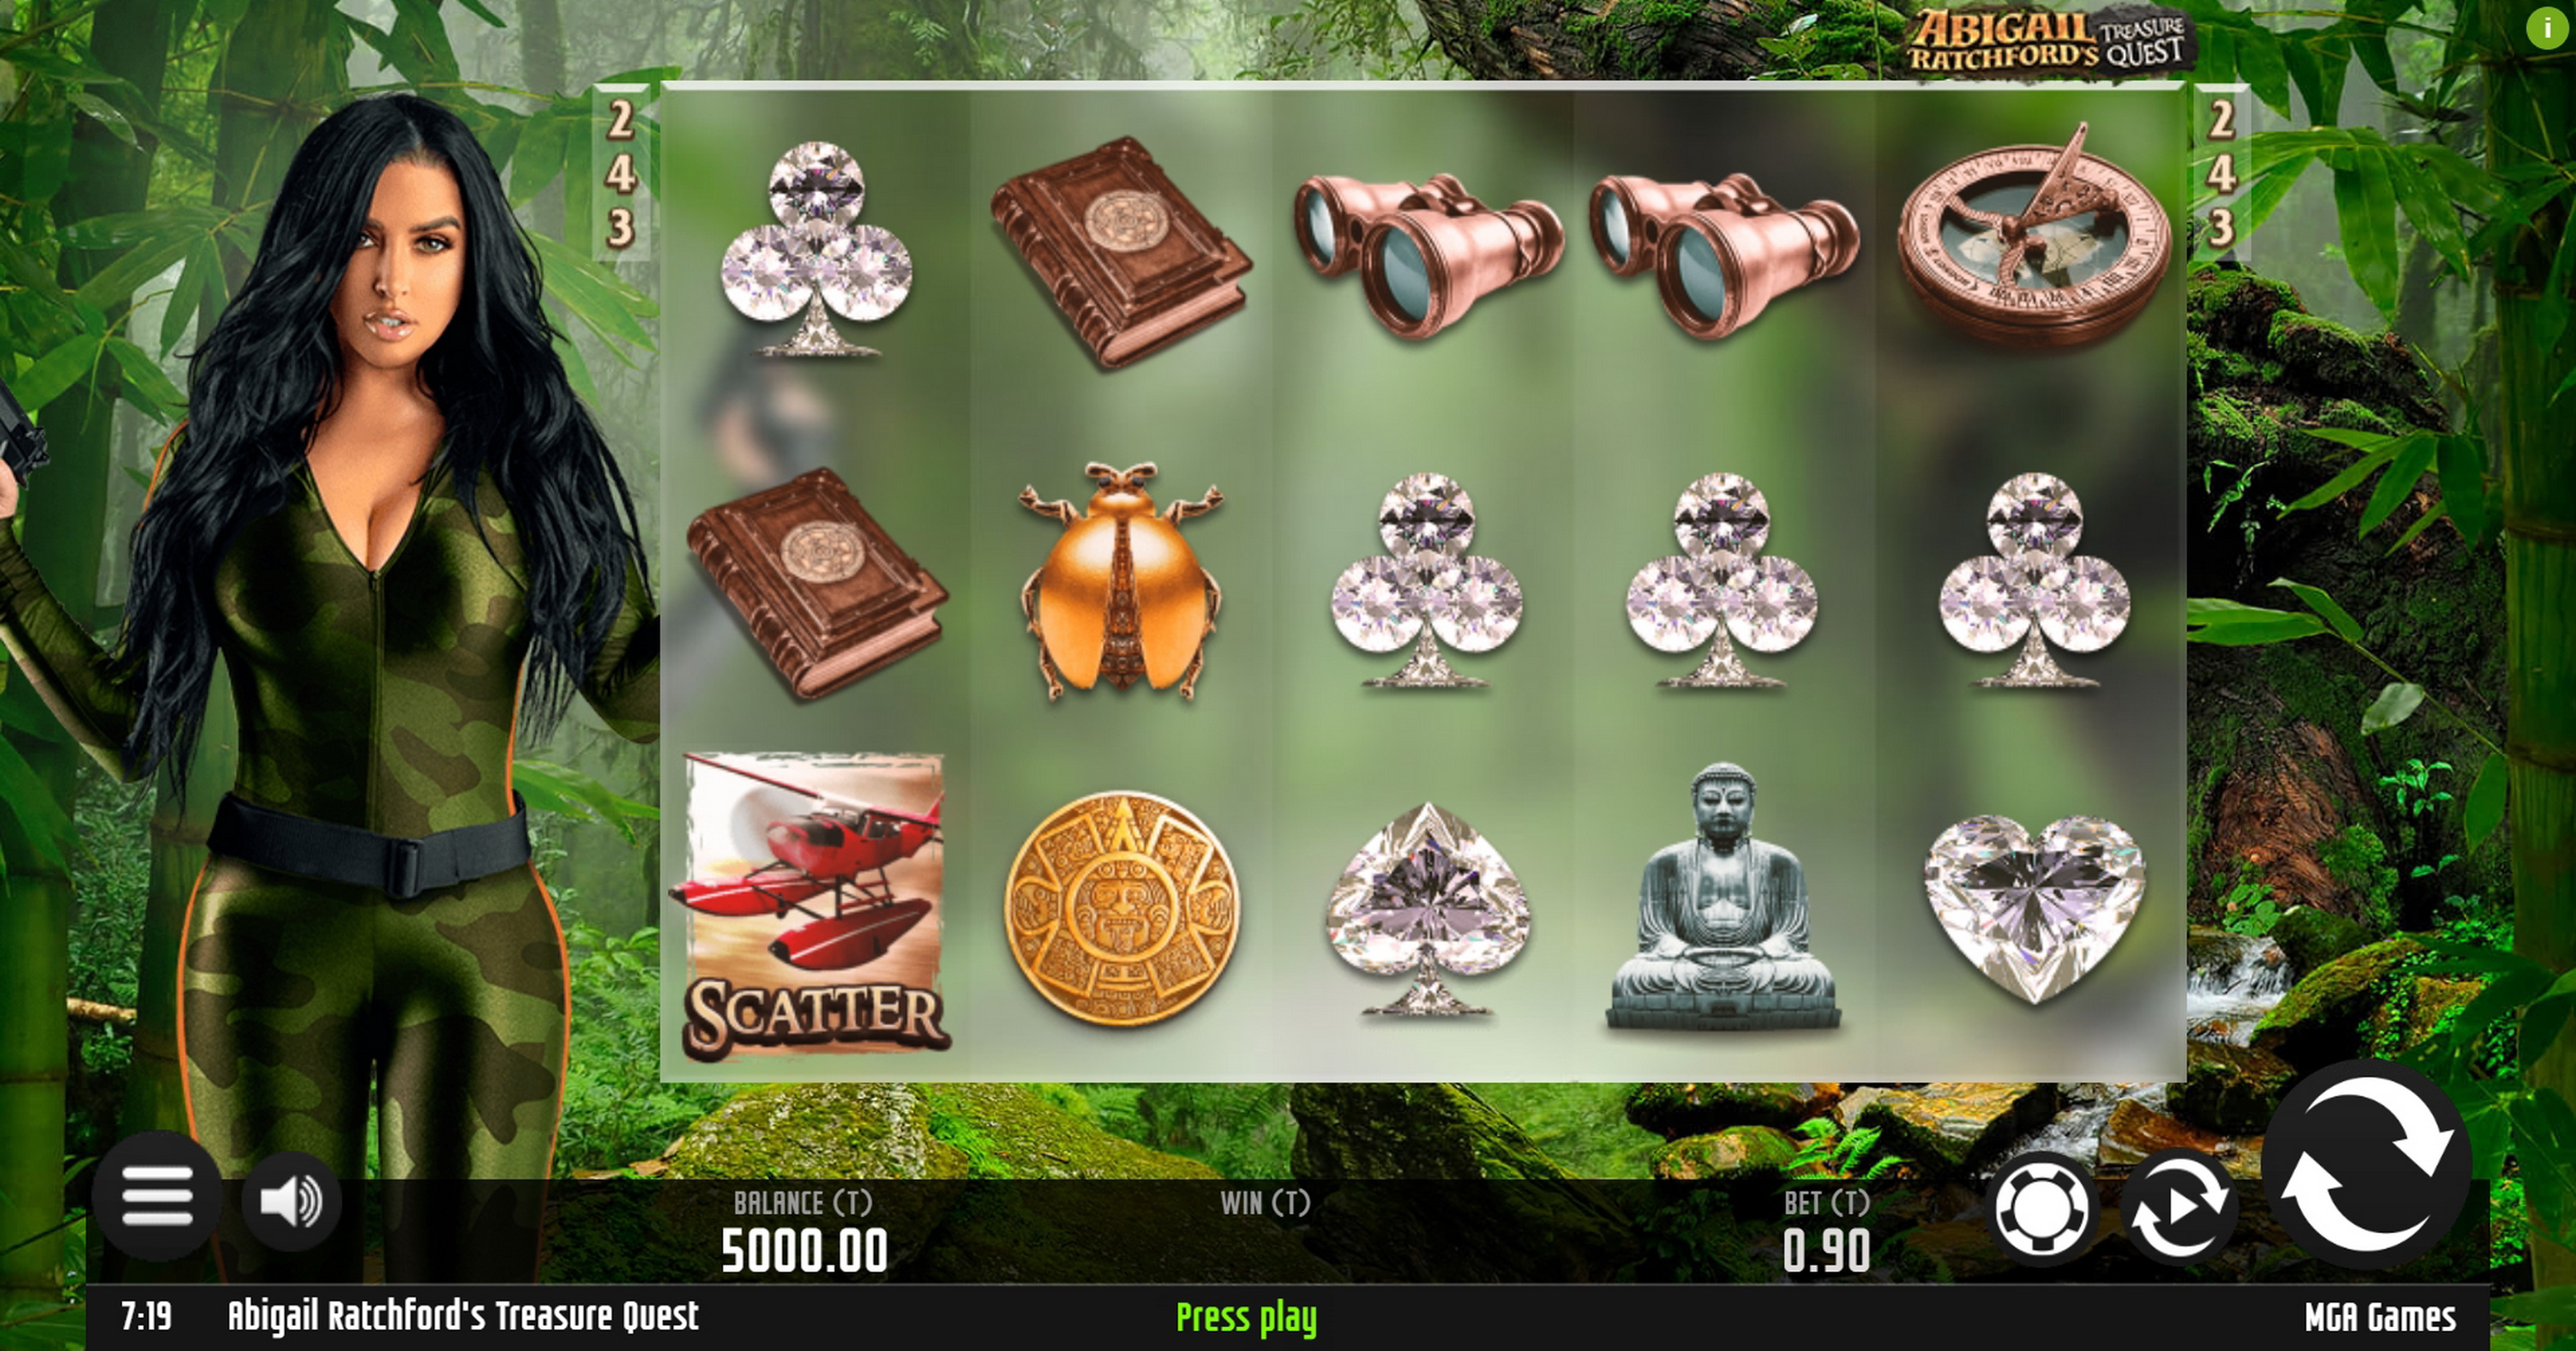 Reels in Abigail Ratchfords Treasure Quest Slot Game by MGA